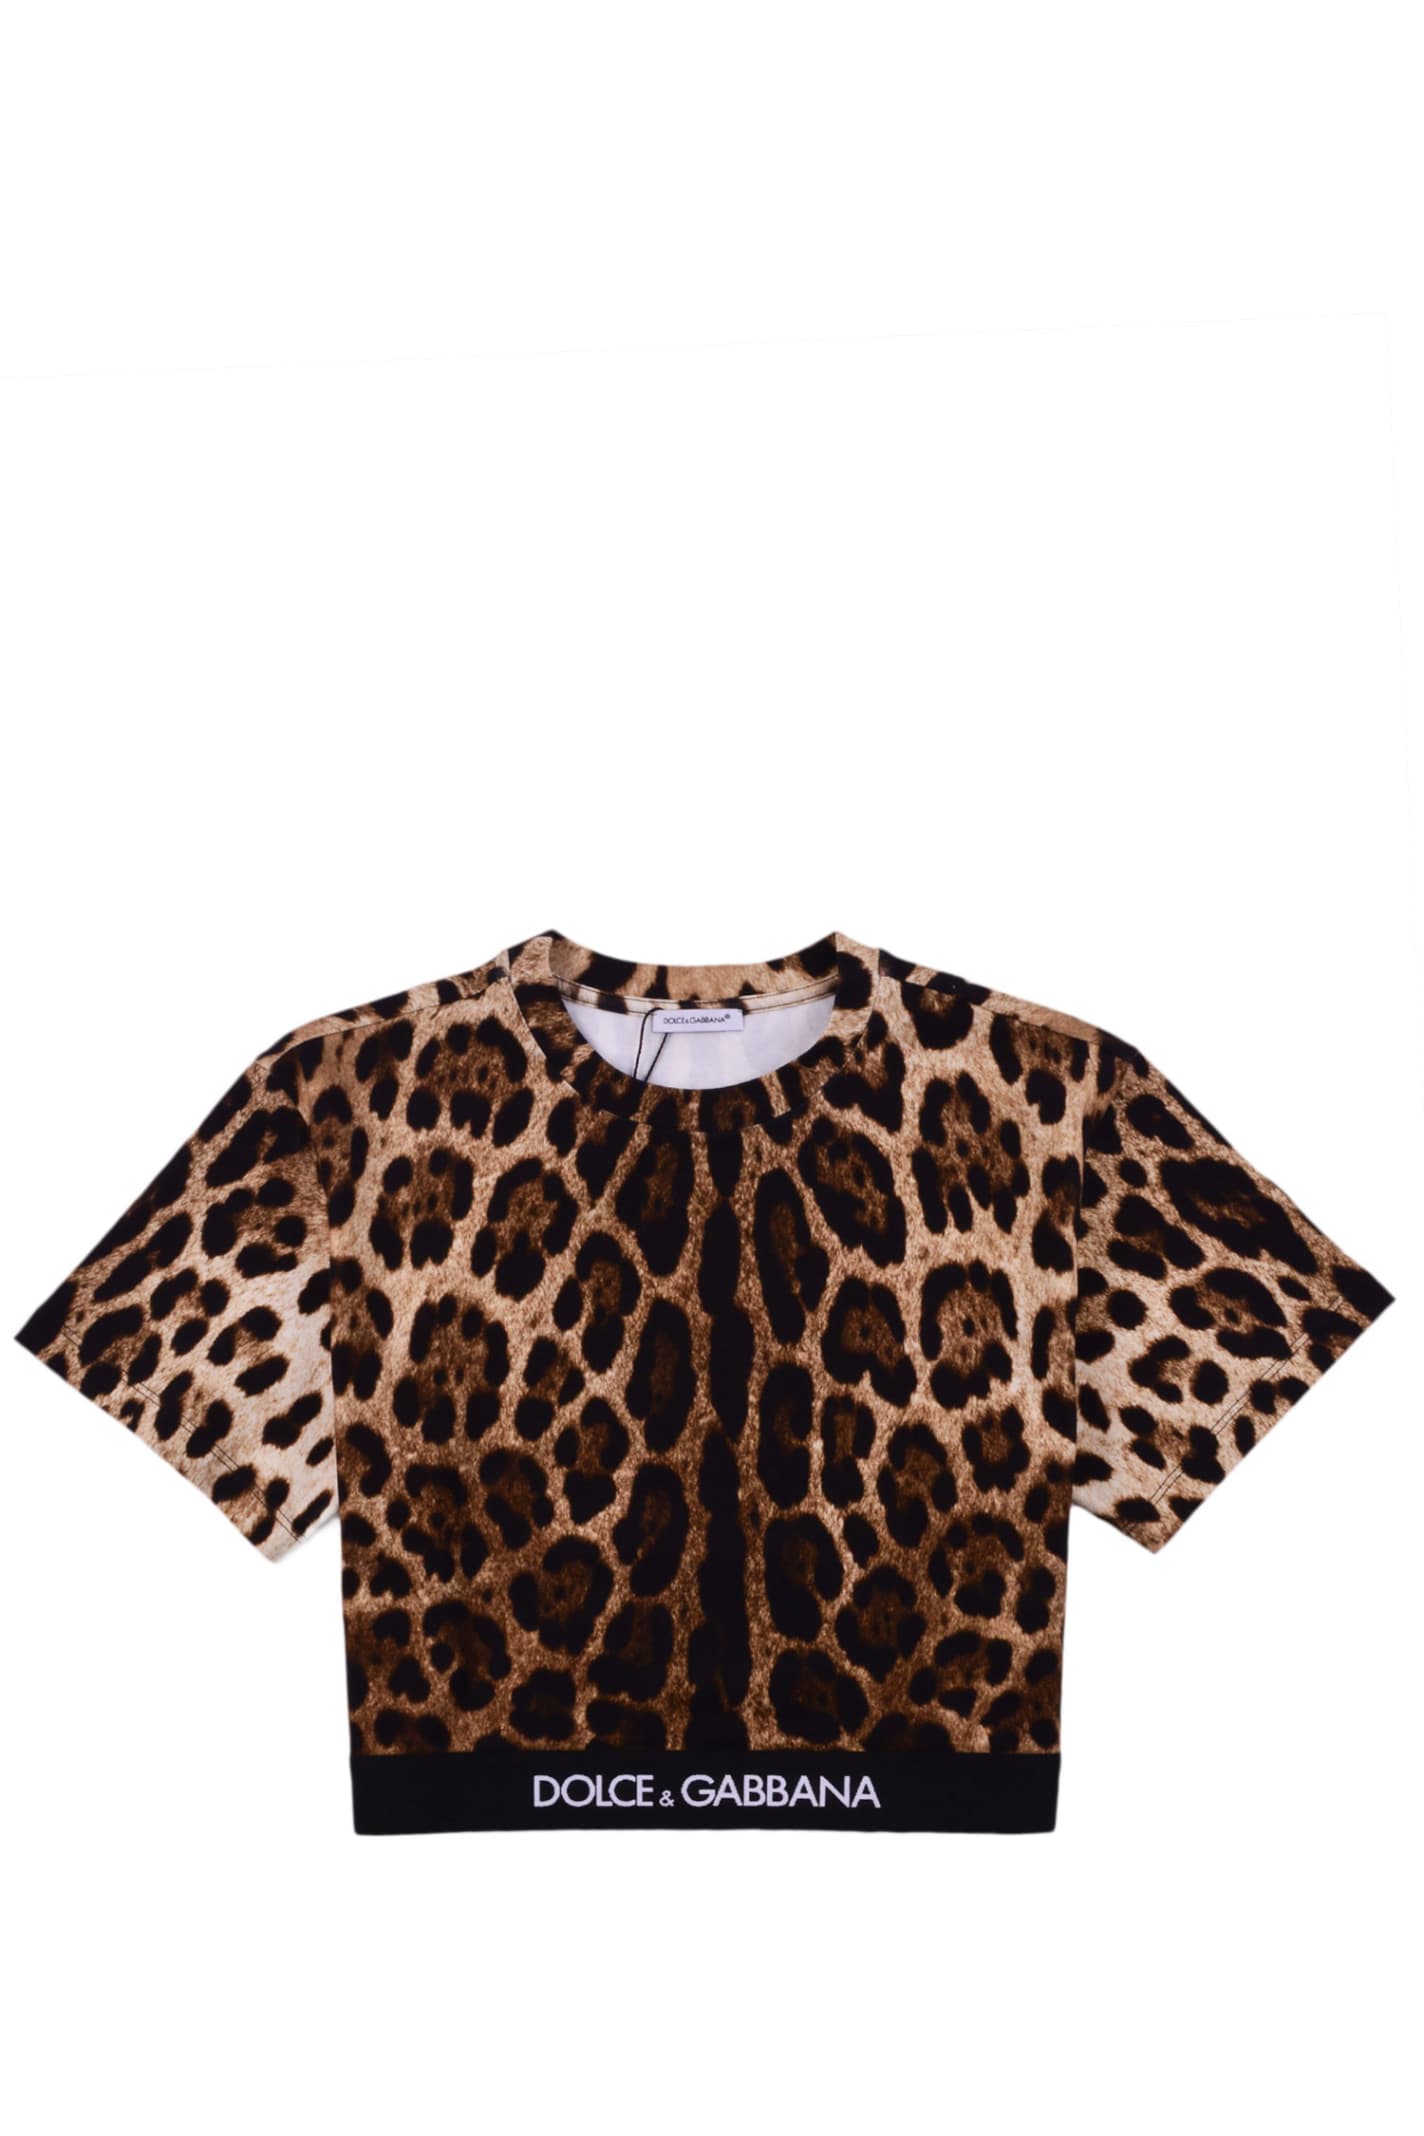 DOLCE & GABBANA CROPPED T-SHIRT WITH LEOPARD PRINT